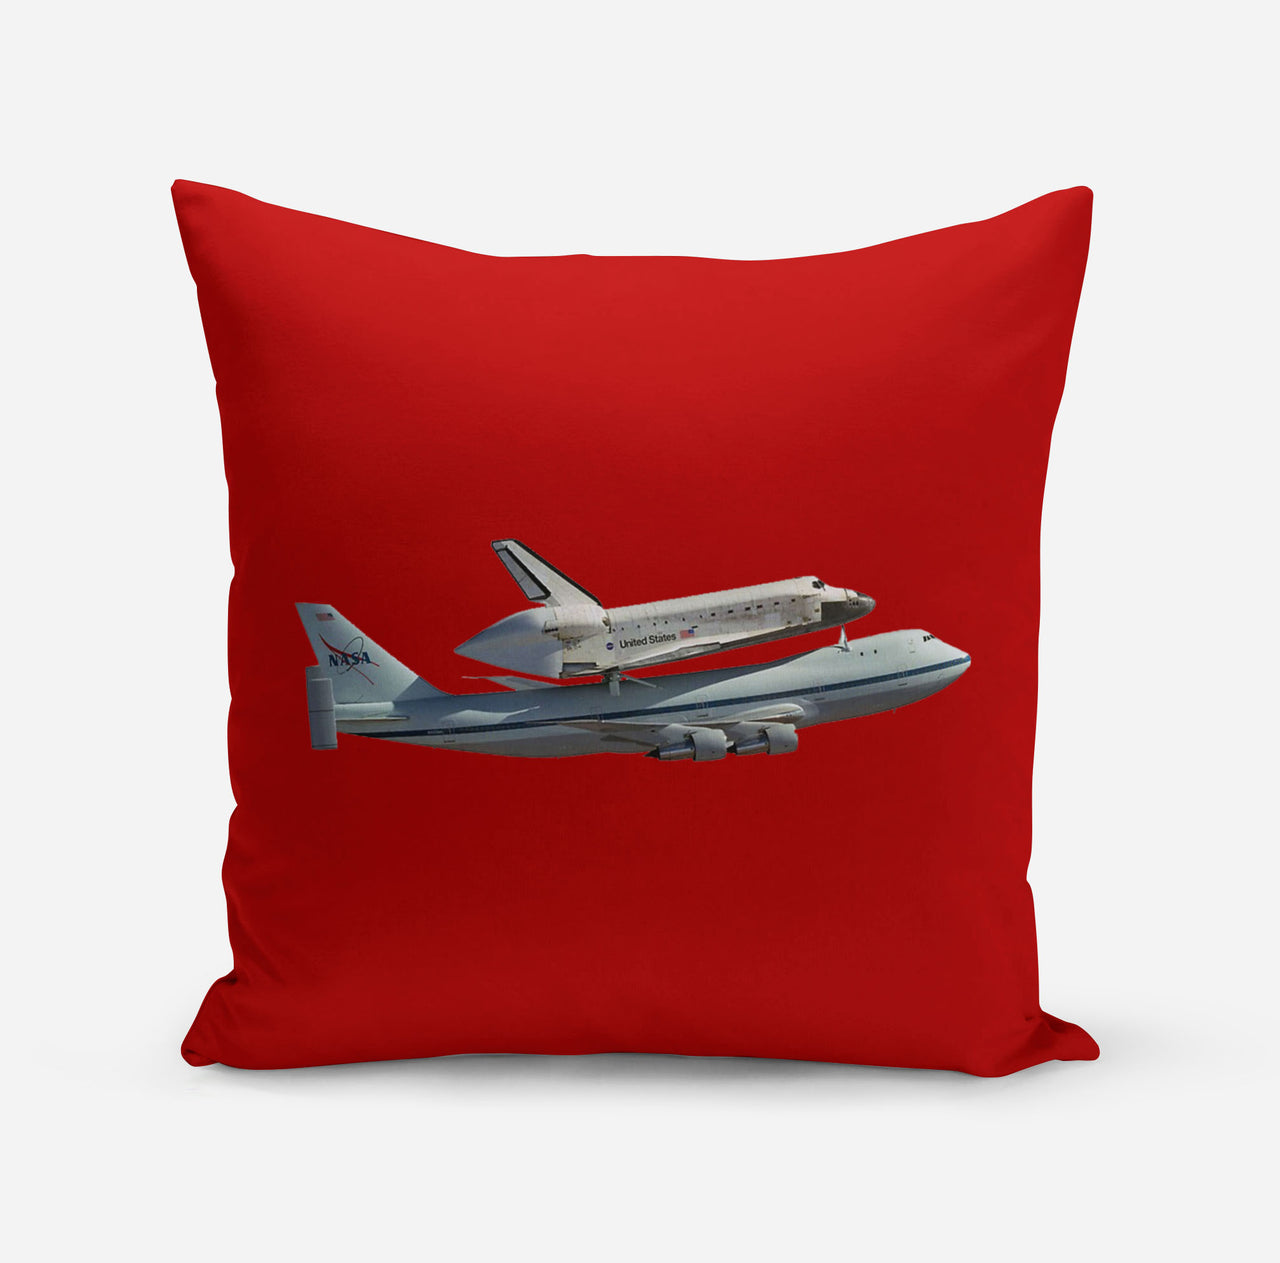 Space shuttle on 747 Designed Pillows